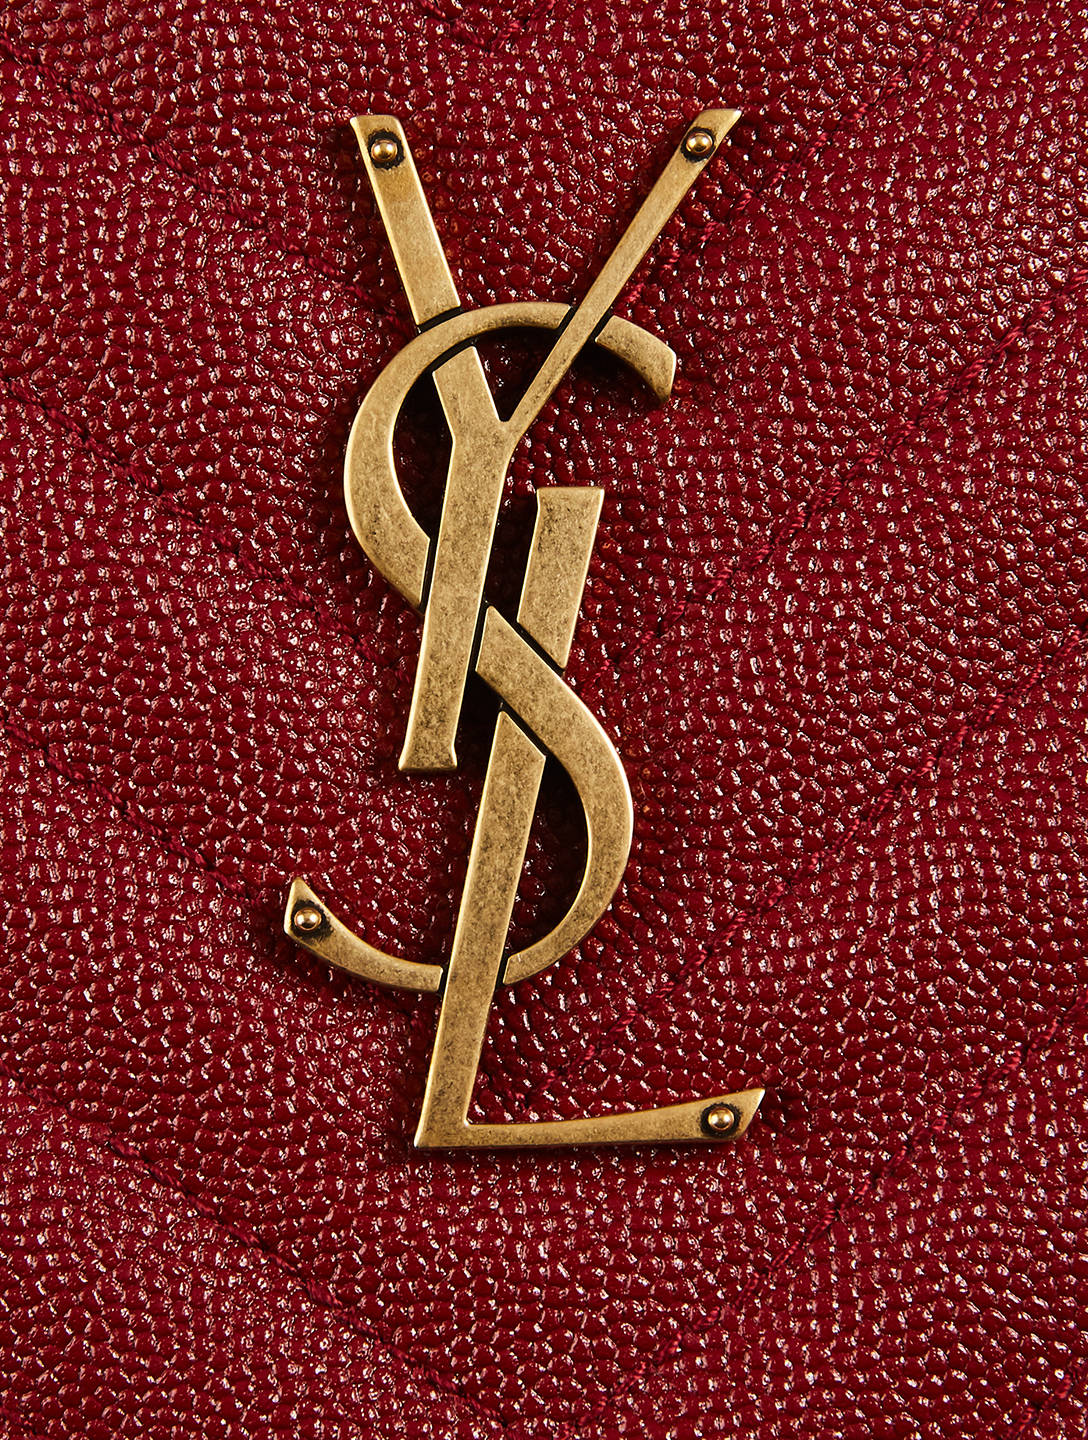 Louis Vuitton, Chanel, Gucci Wallpapers For IPhone  Sparkly iphone  wallpaper, Iphone wallpaper hipster, Pink wallpaper iphone